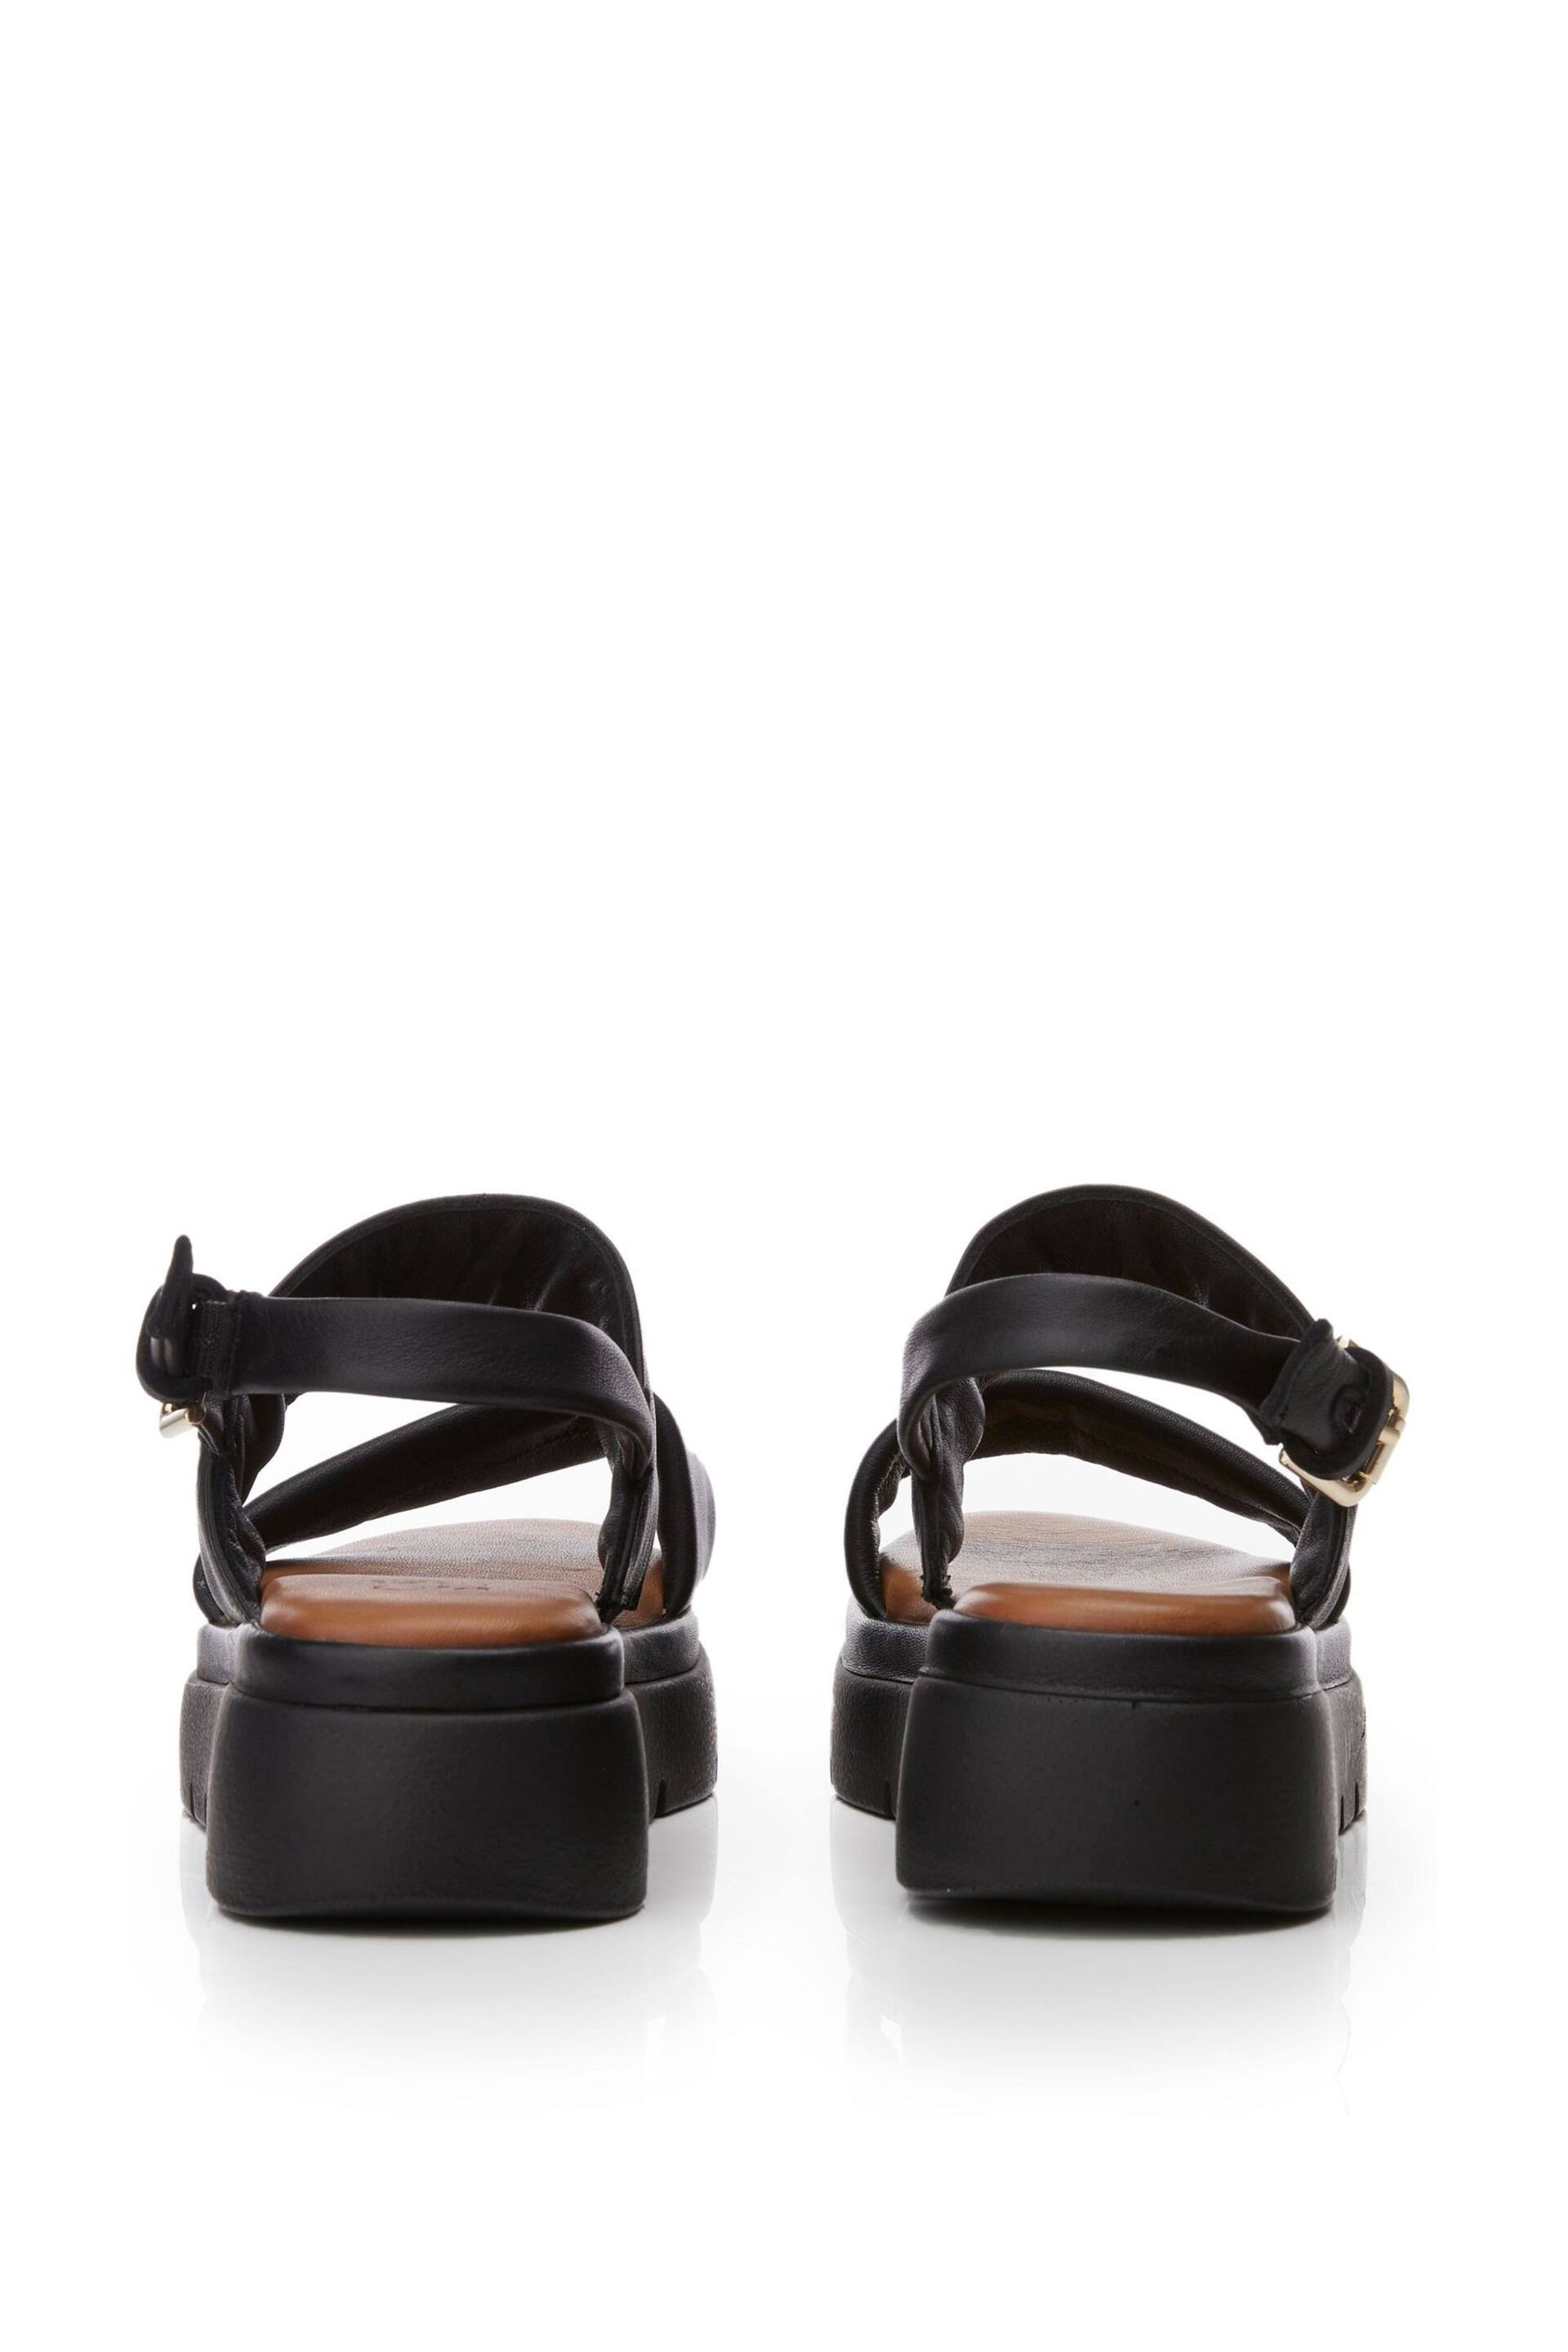 Moda in Pelle Tone Nelly Two Part Flexi Ring Hardware Wedge Sandals - Image 4 of 4